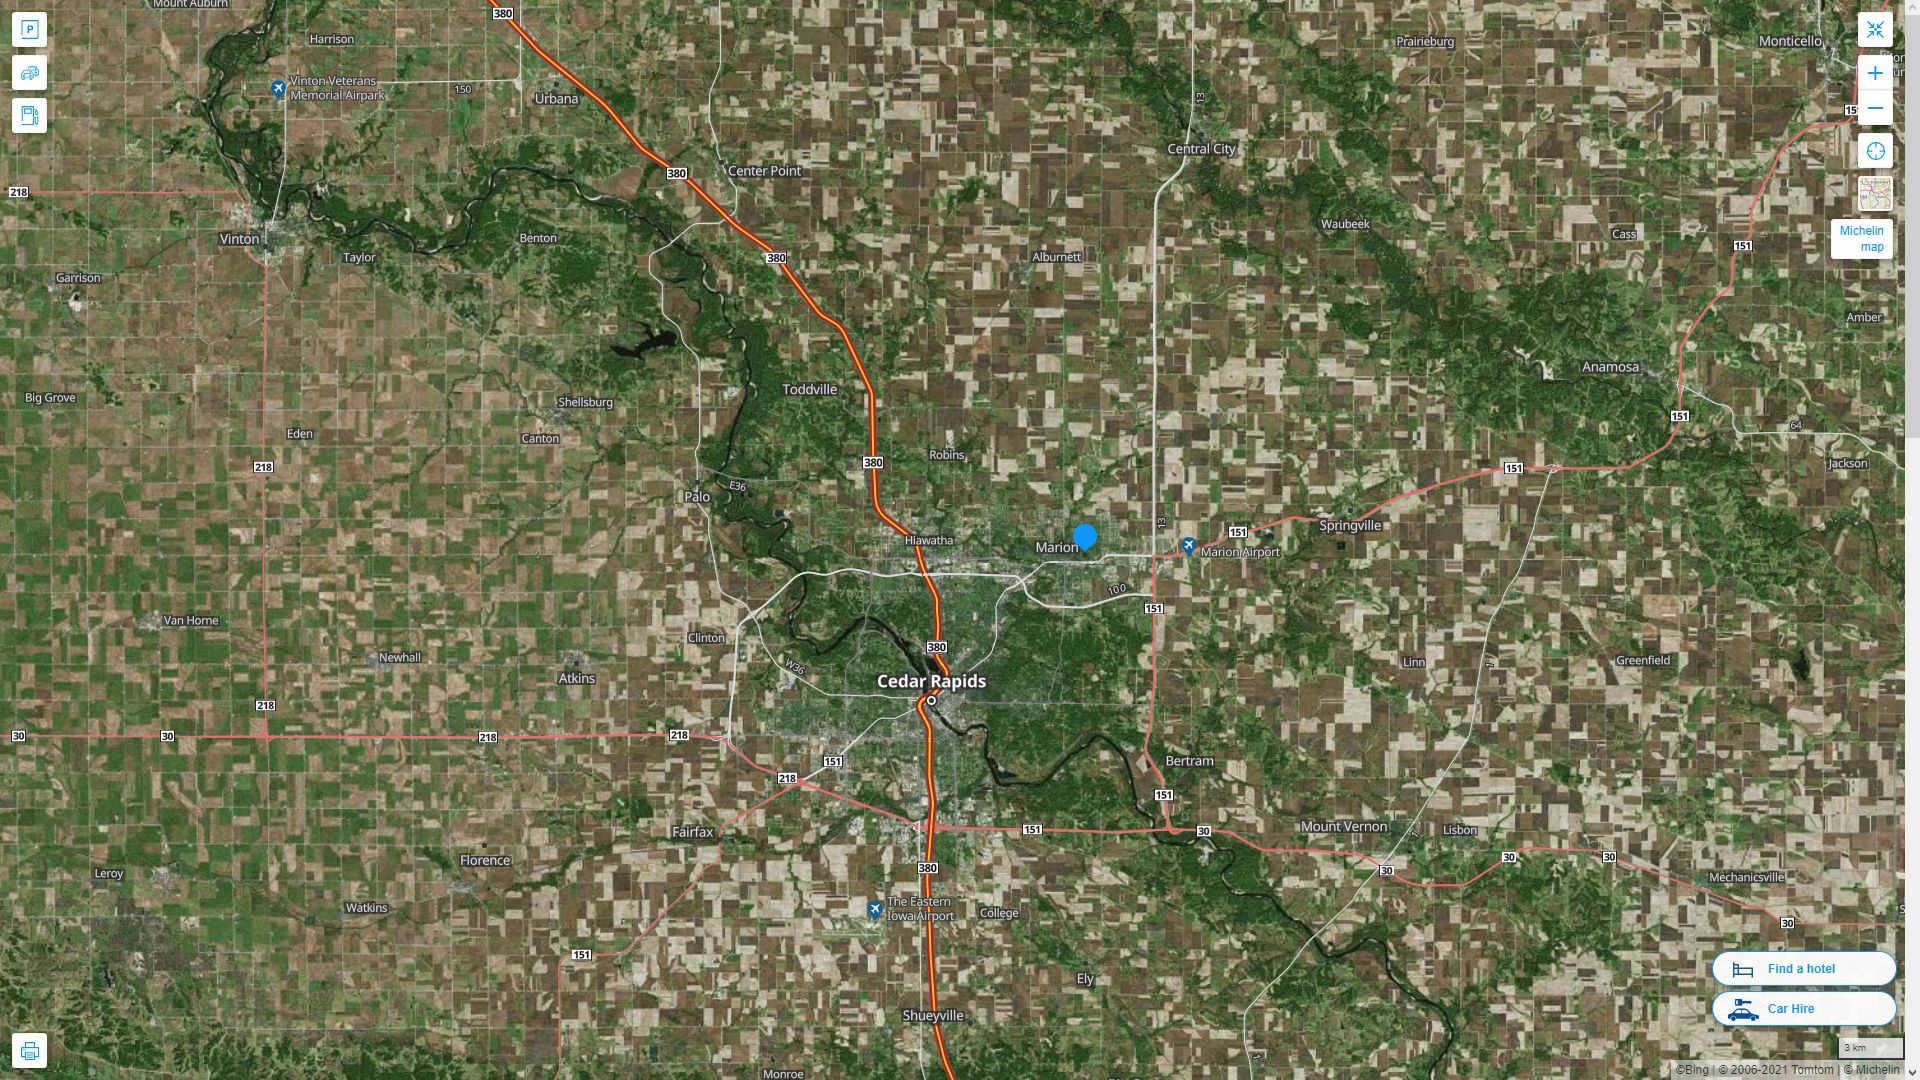 Marion iowa Highway and Road Map with Satellite View